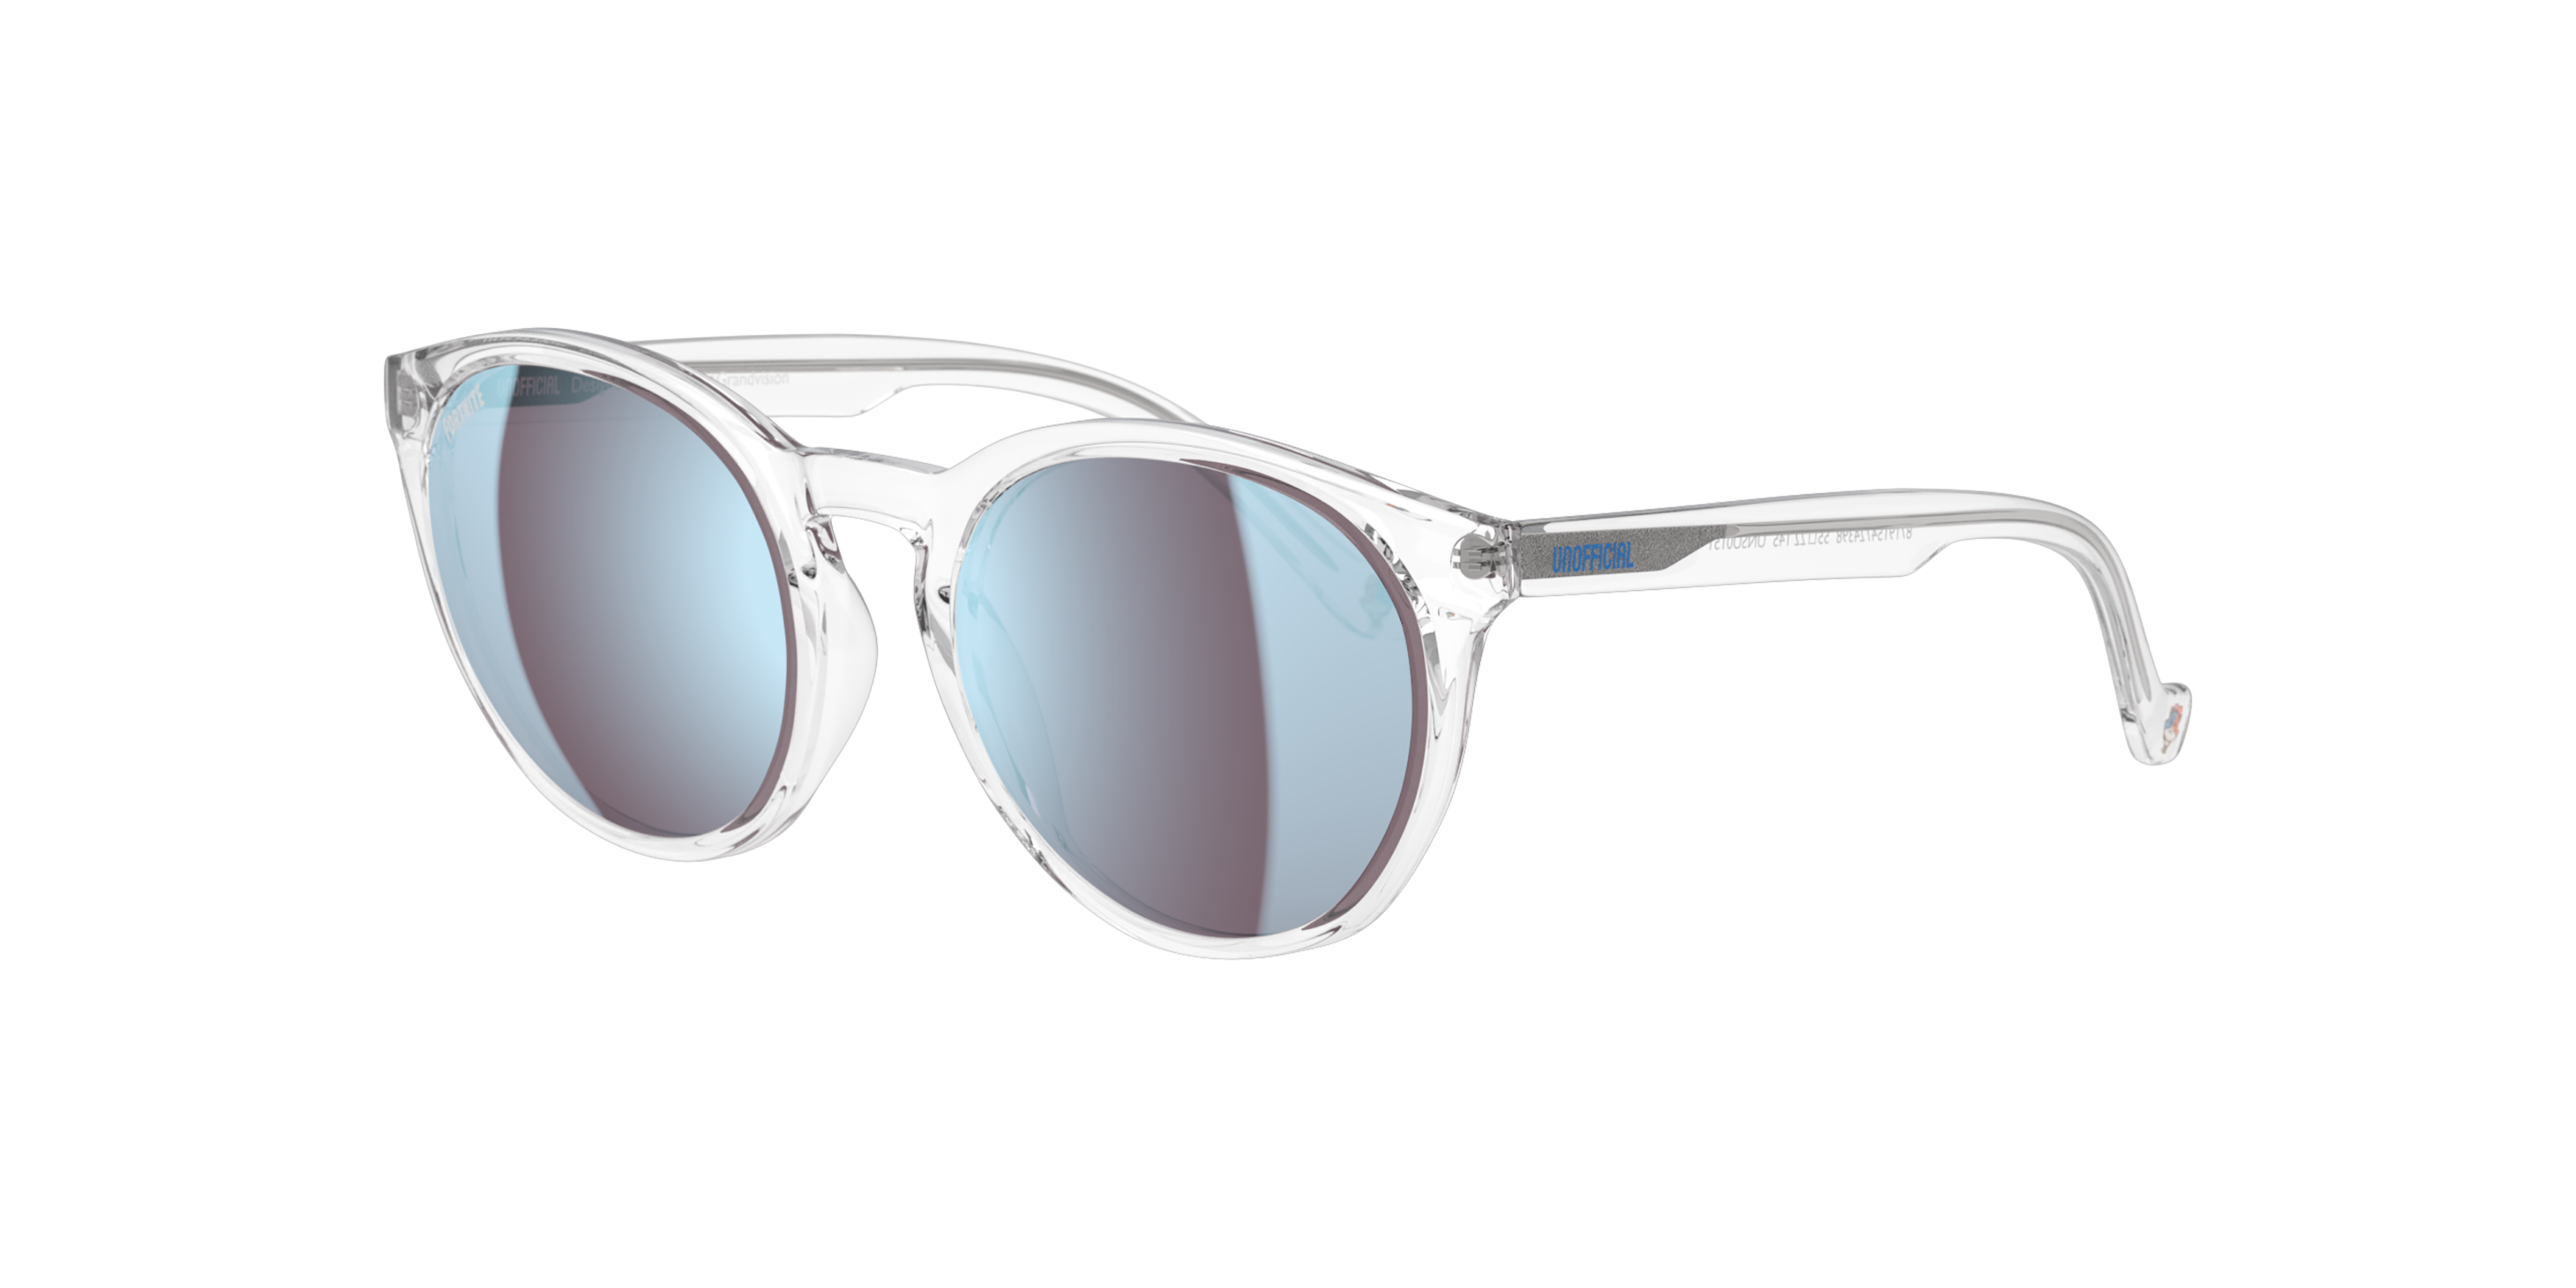 Angle_Left01 Fortnite with Unofficial UNSU0151 Sunglasses Grey / Transparent, Clear